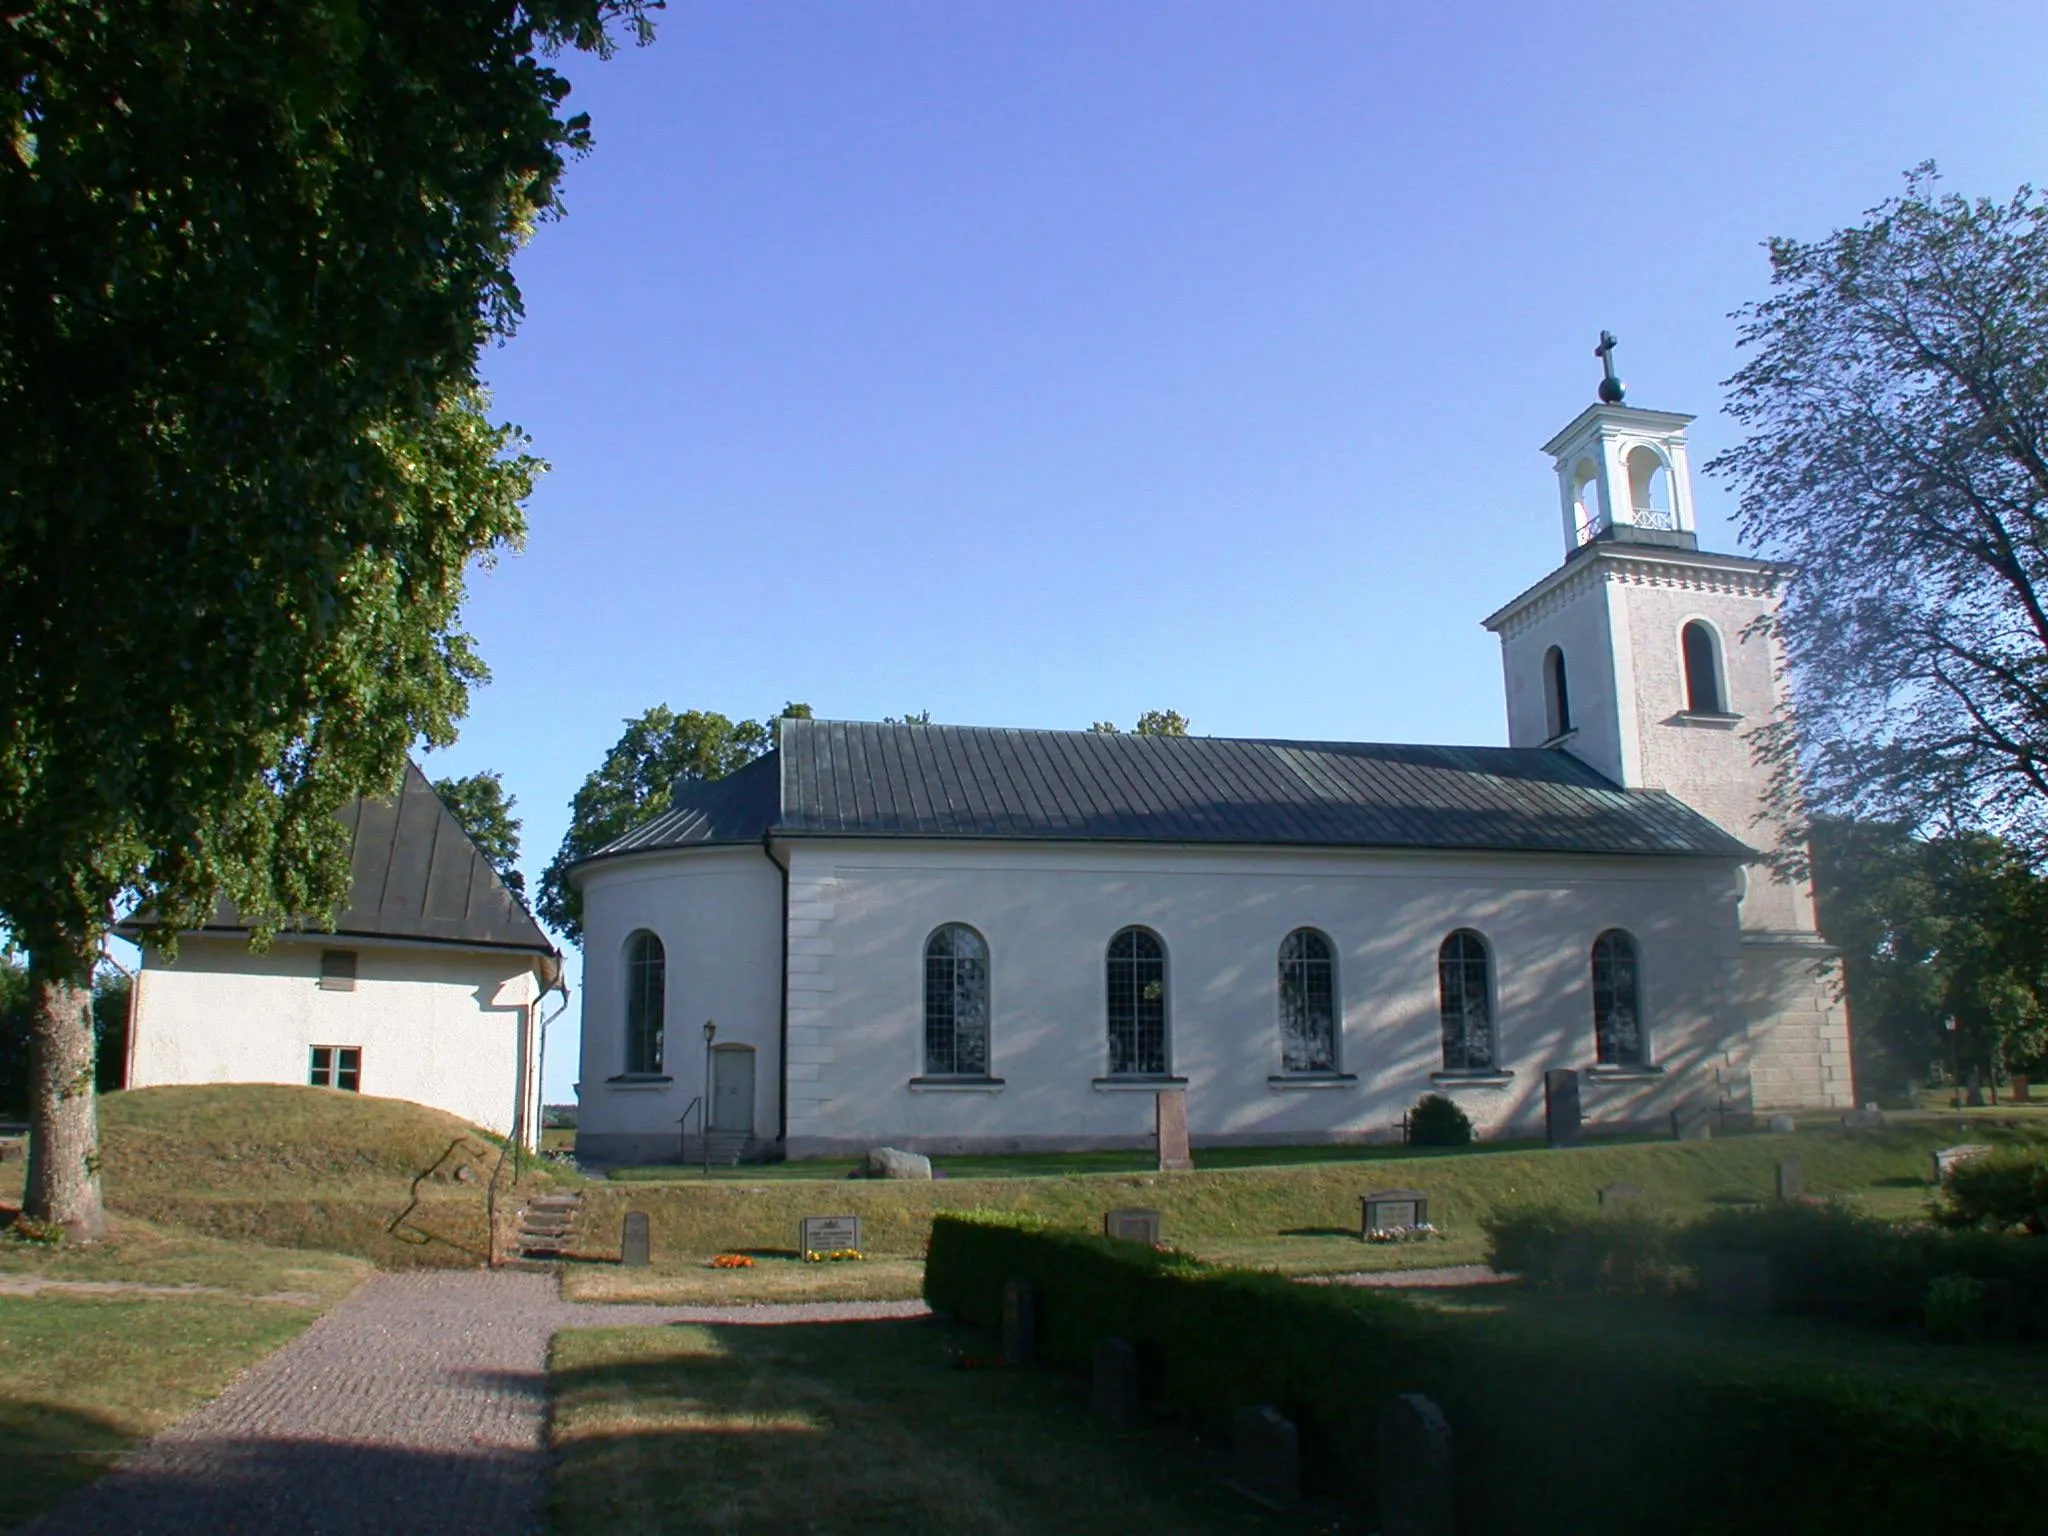 Photo showing: Vallerstad church, Mjölby, Sweden. Photo by Riggwelter July 12, 2006.